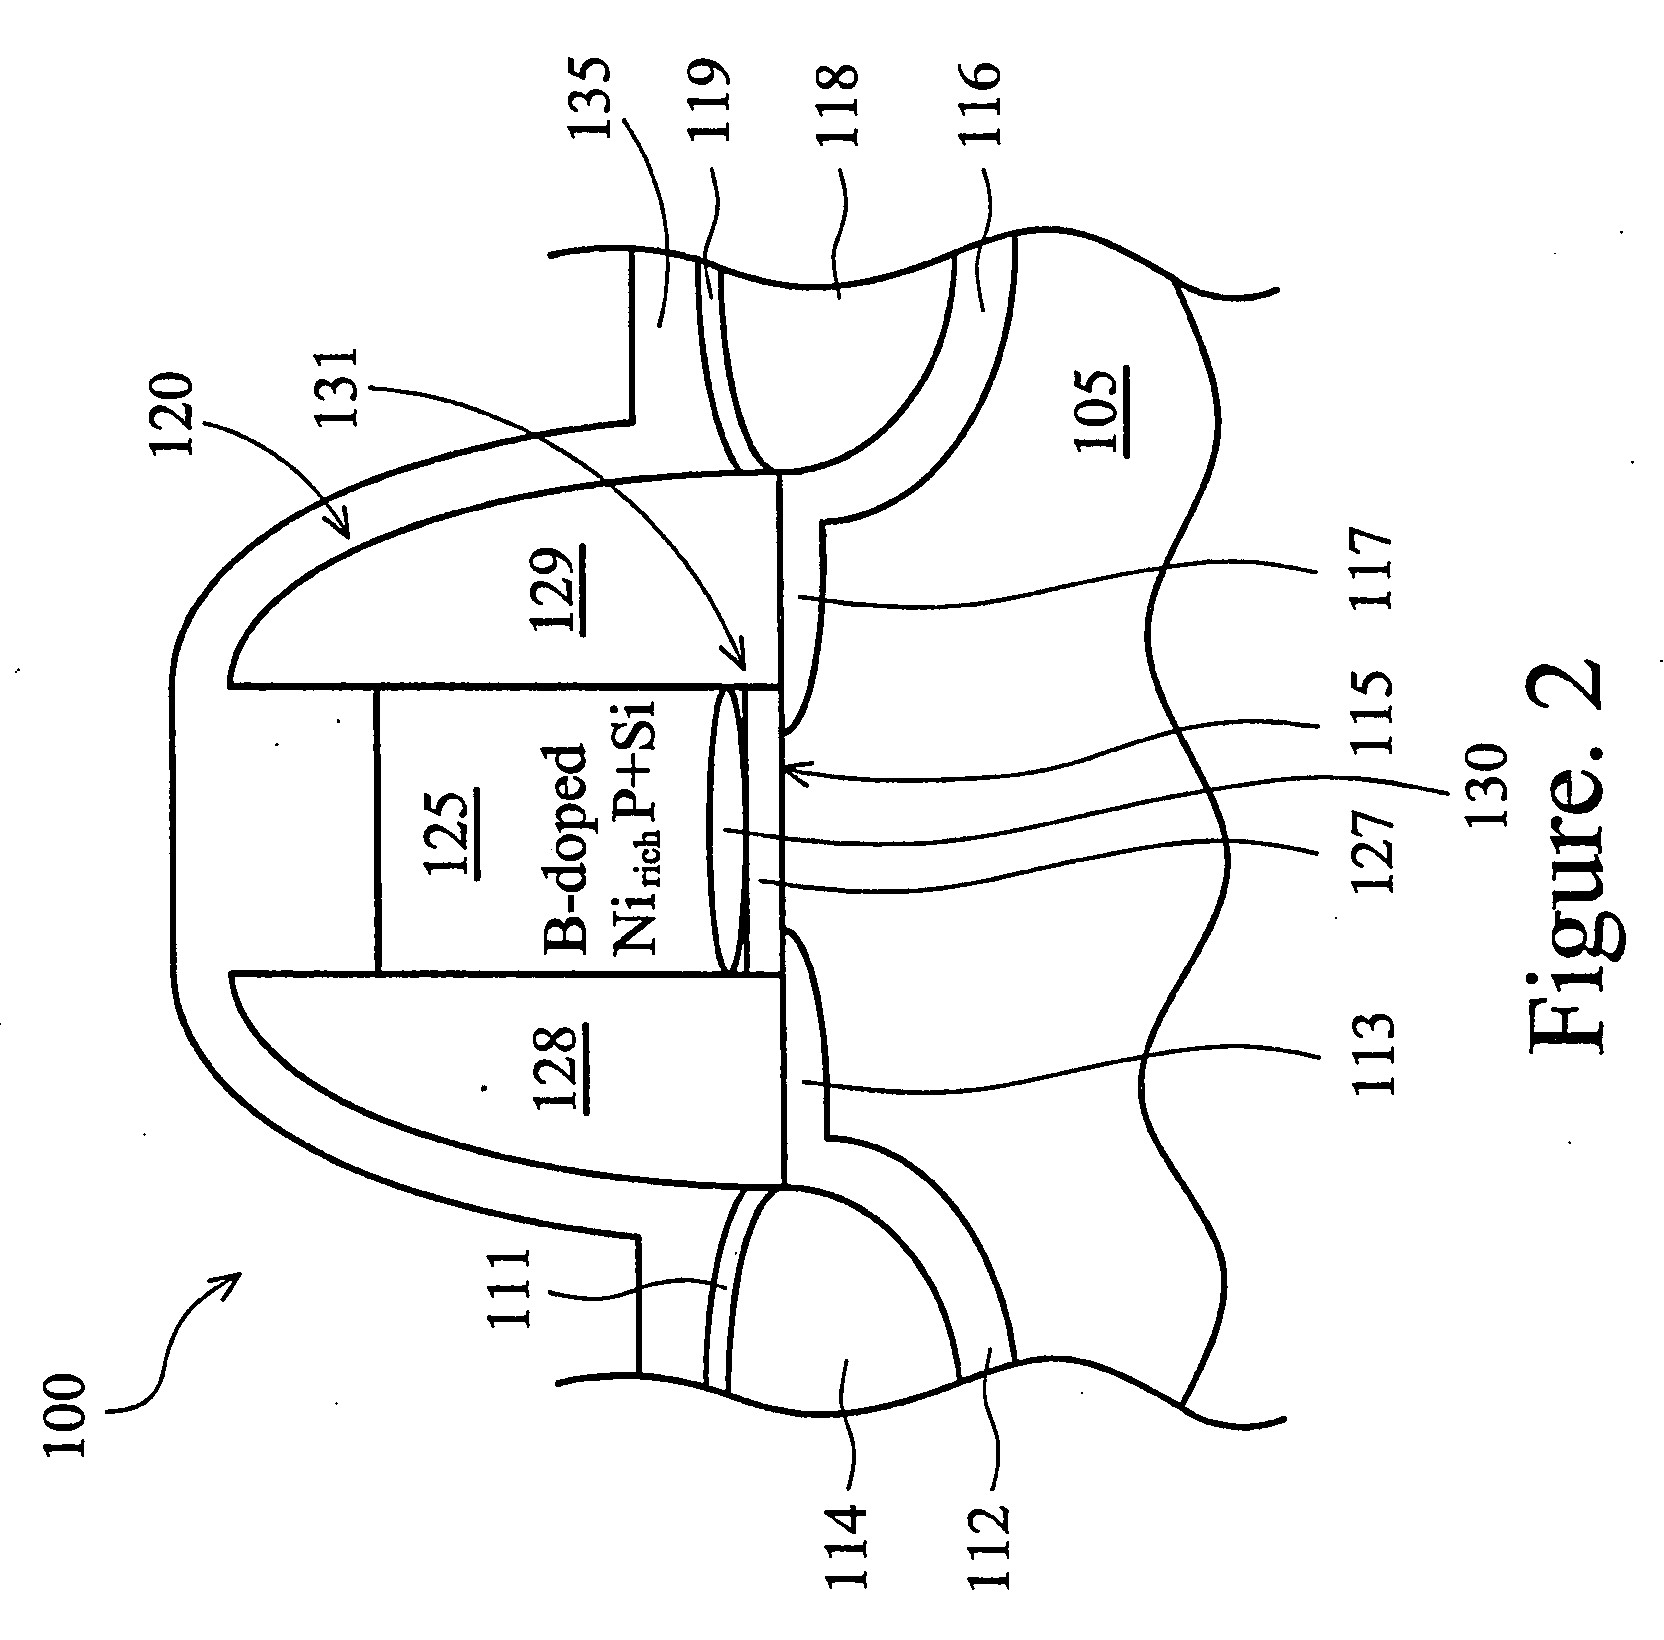 Silicided metal gate for multi-threshold voltage configuration